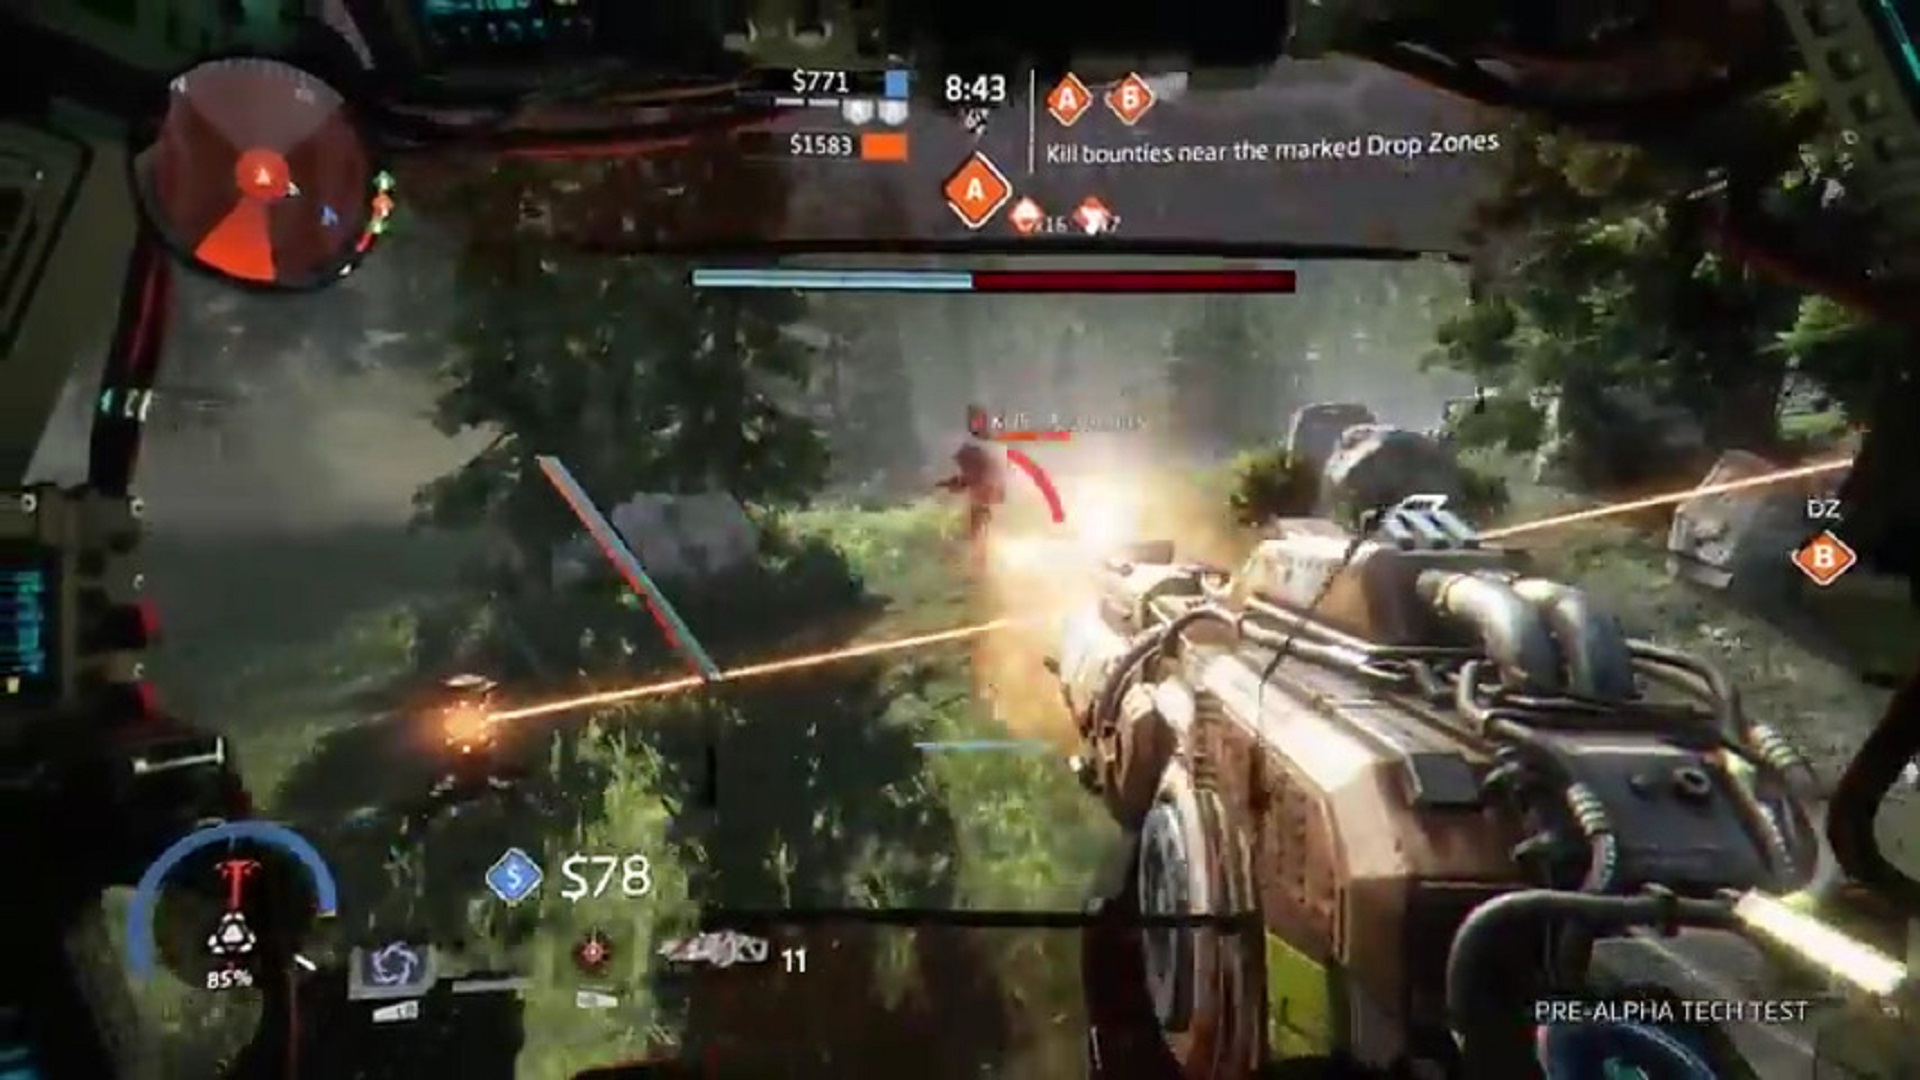 Here's four minutes of Titanfall 2 gameplay